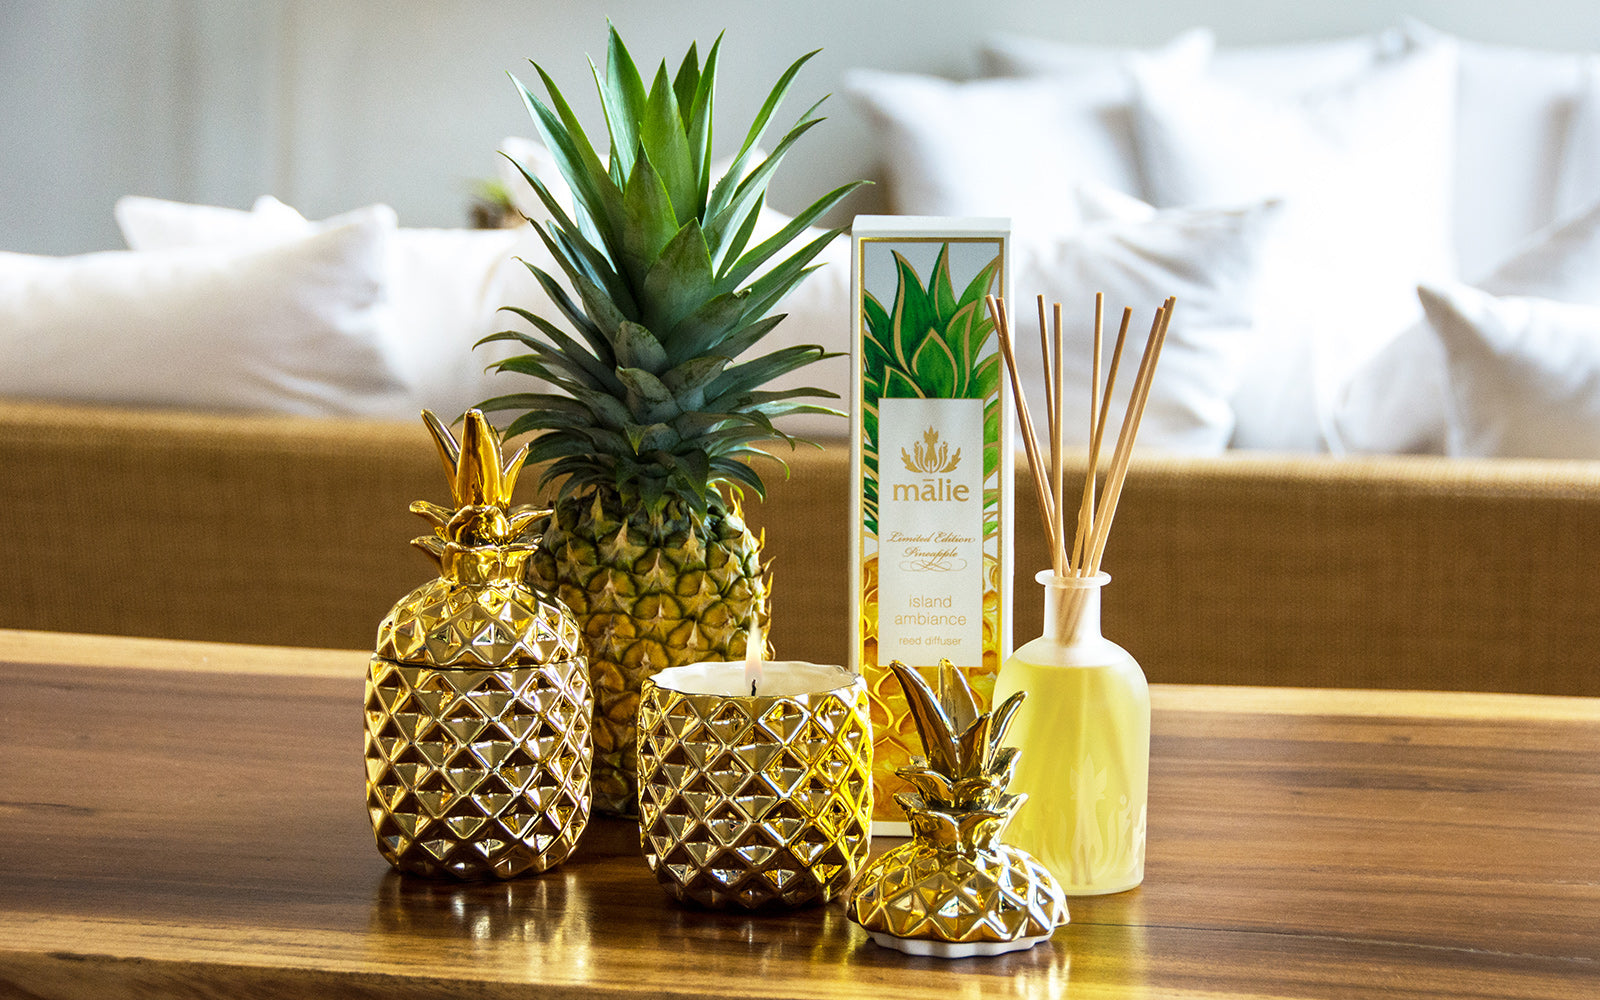 Hawaiian sunshine and pineapple, capturing vacation vibes in a luxury home